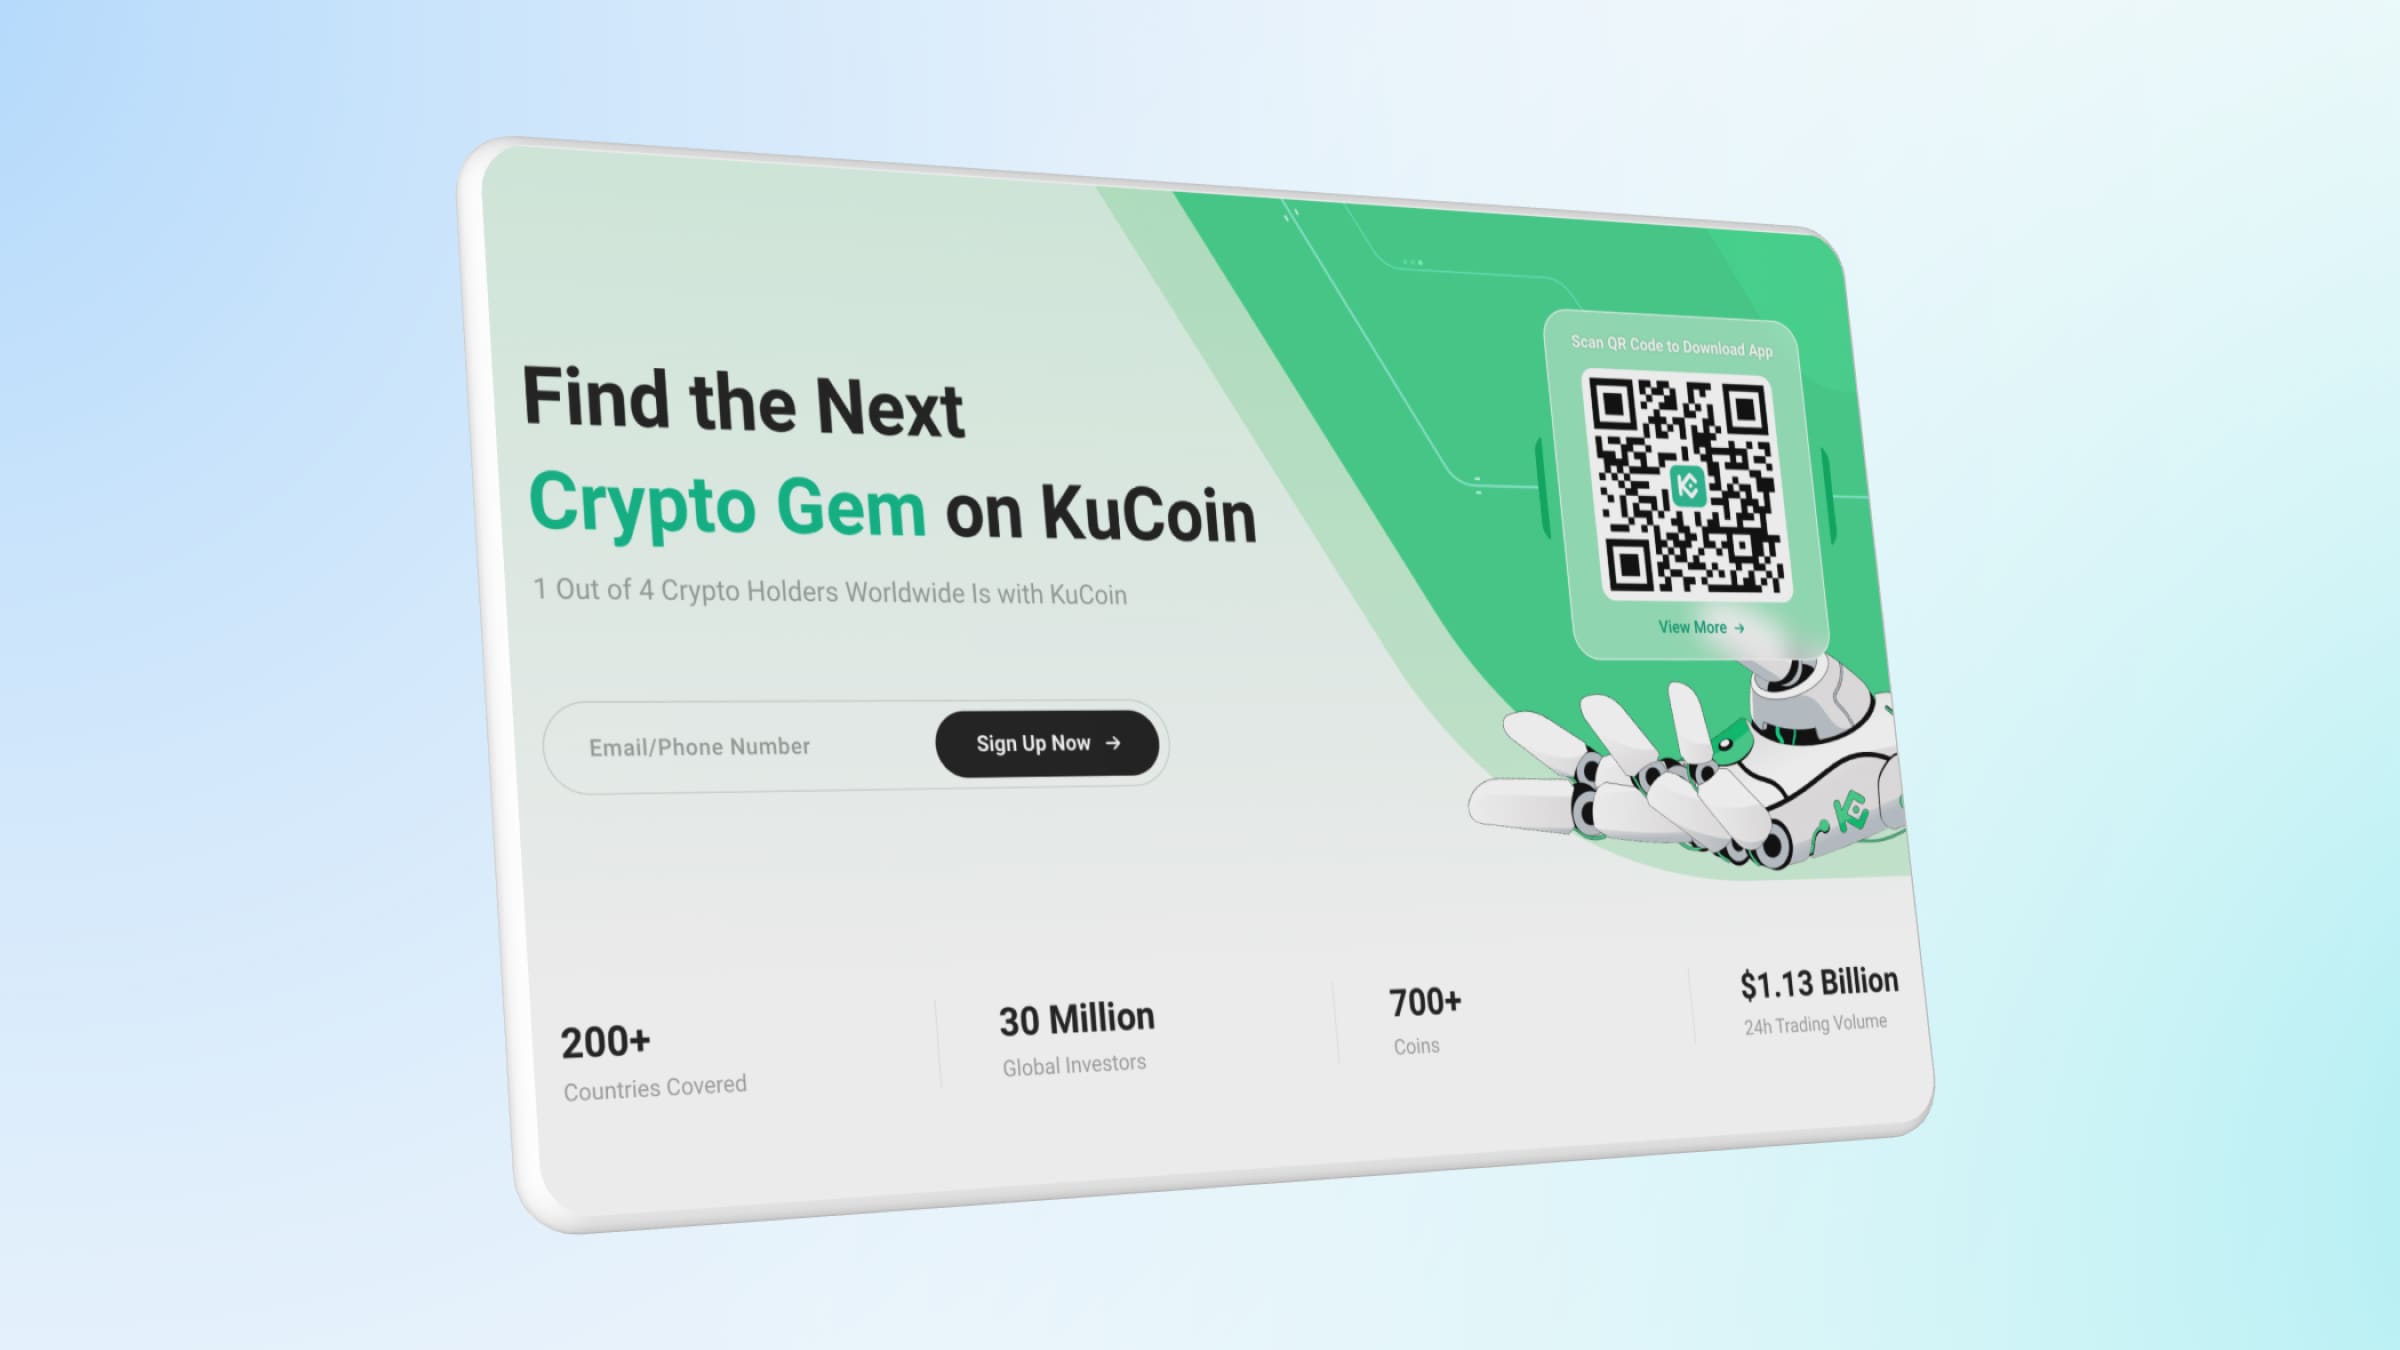 KuCoin is a platform with a high level of security and support for Proof of Reserves.